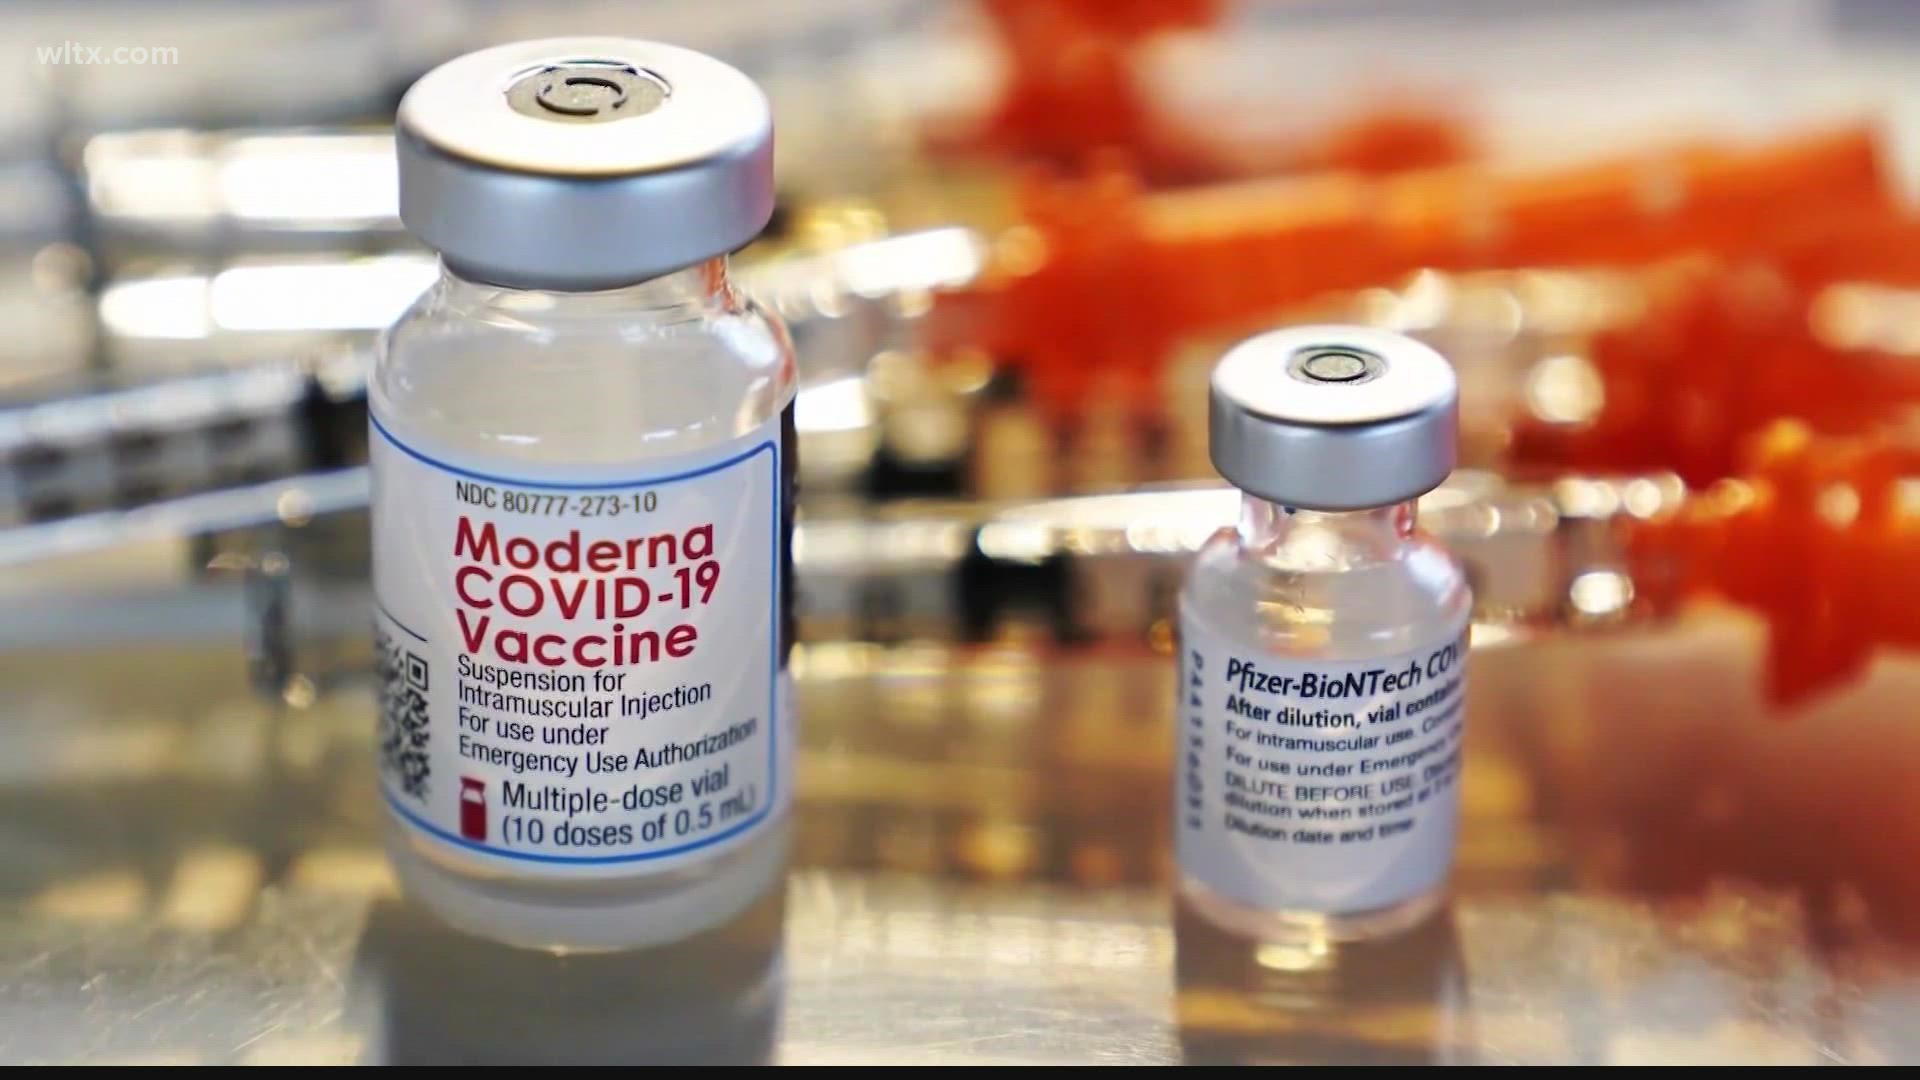 As early as this week, U.S. health authorities are expected to recommend an extra dose of the vaccine for all Americans eight months after getting their second shot.